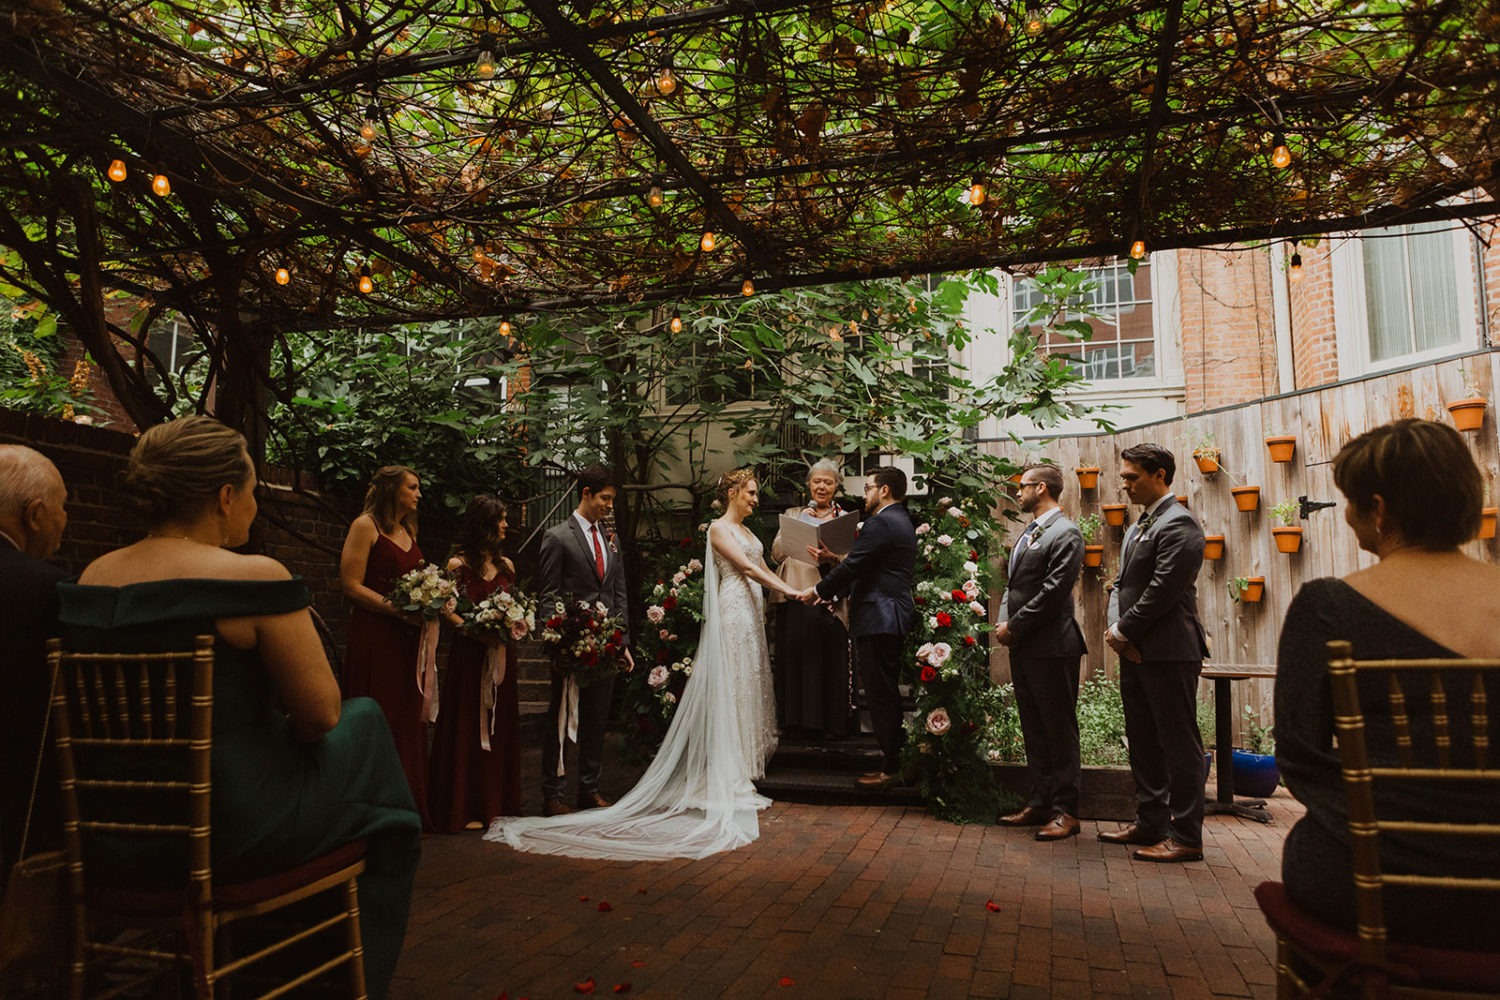 Couple exchanges vows under ivy covering at DC wedding